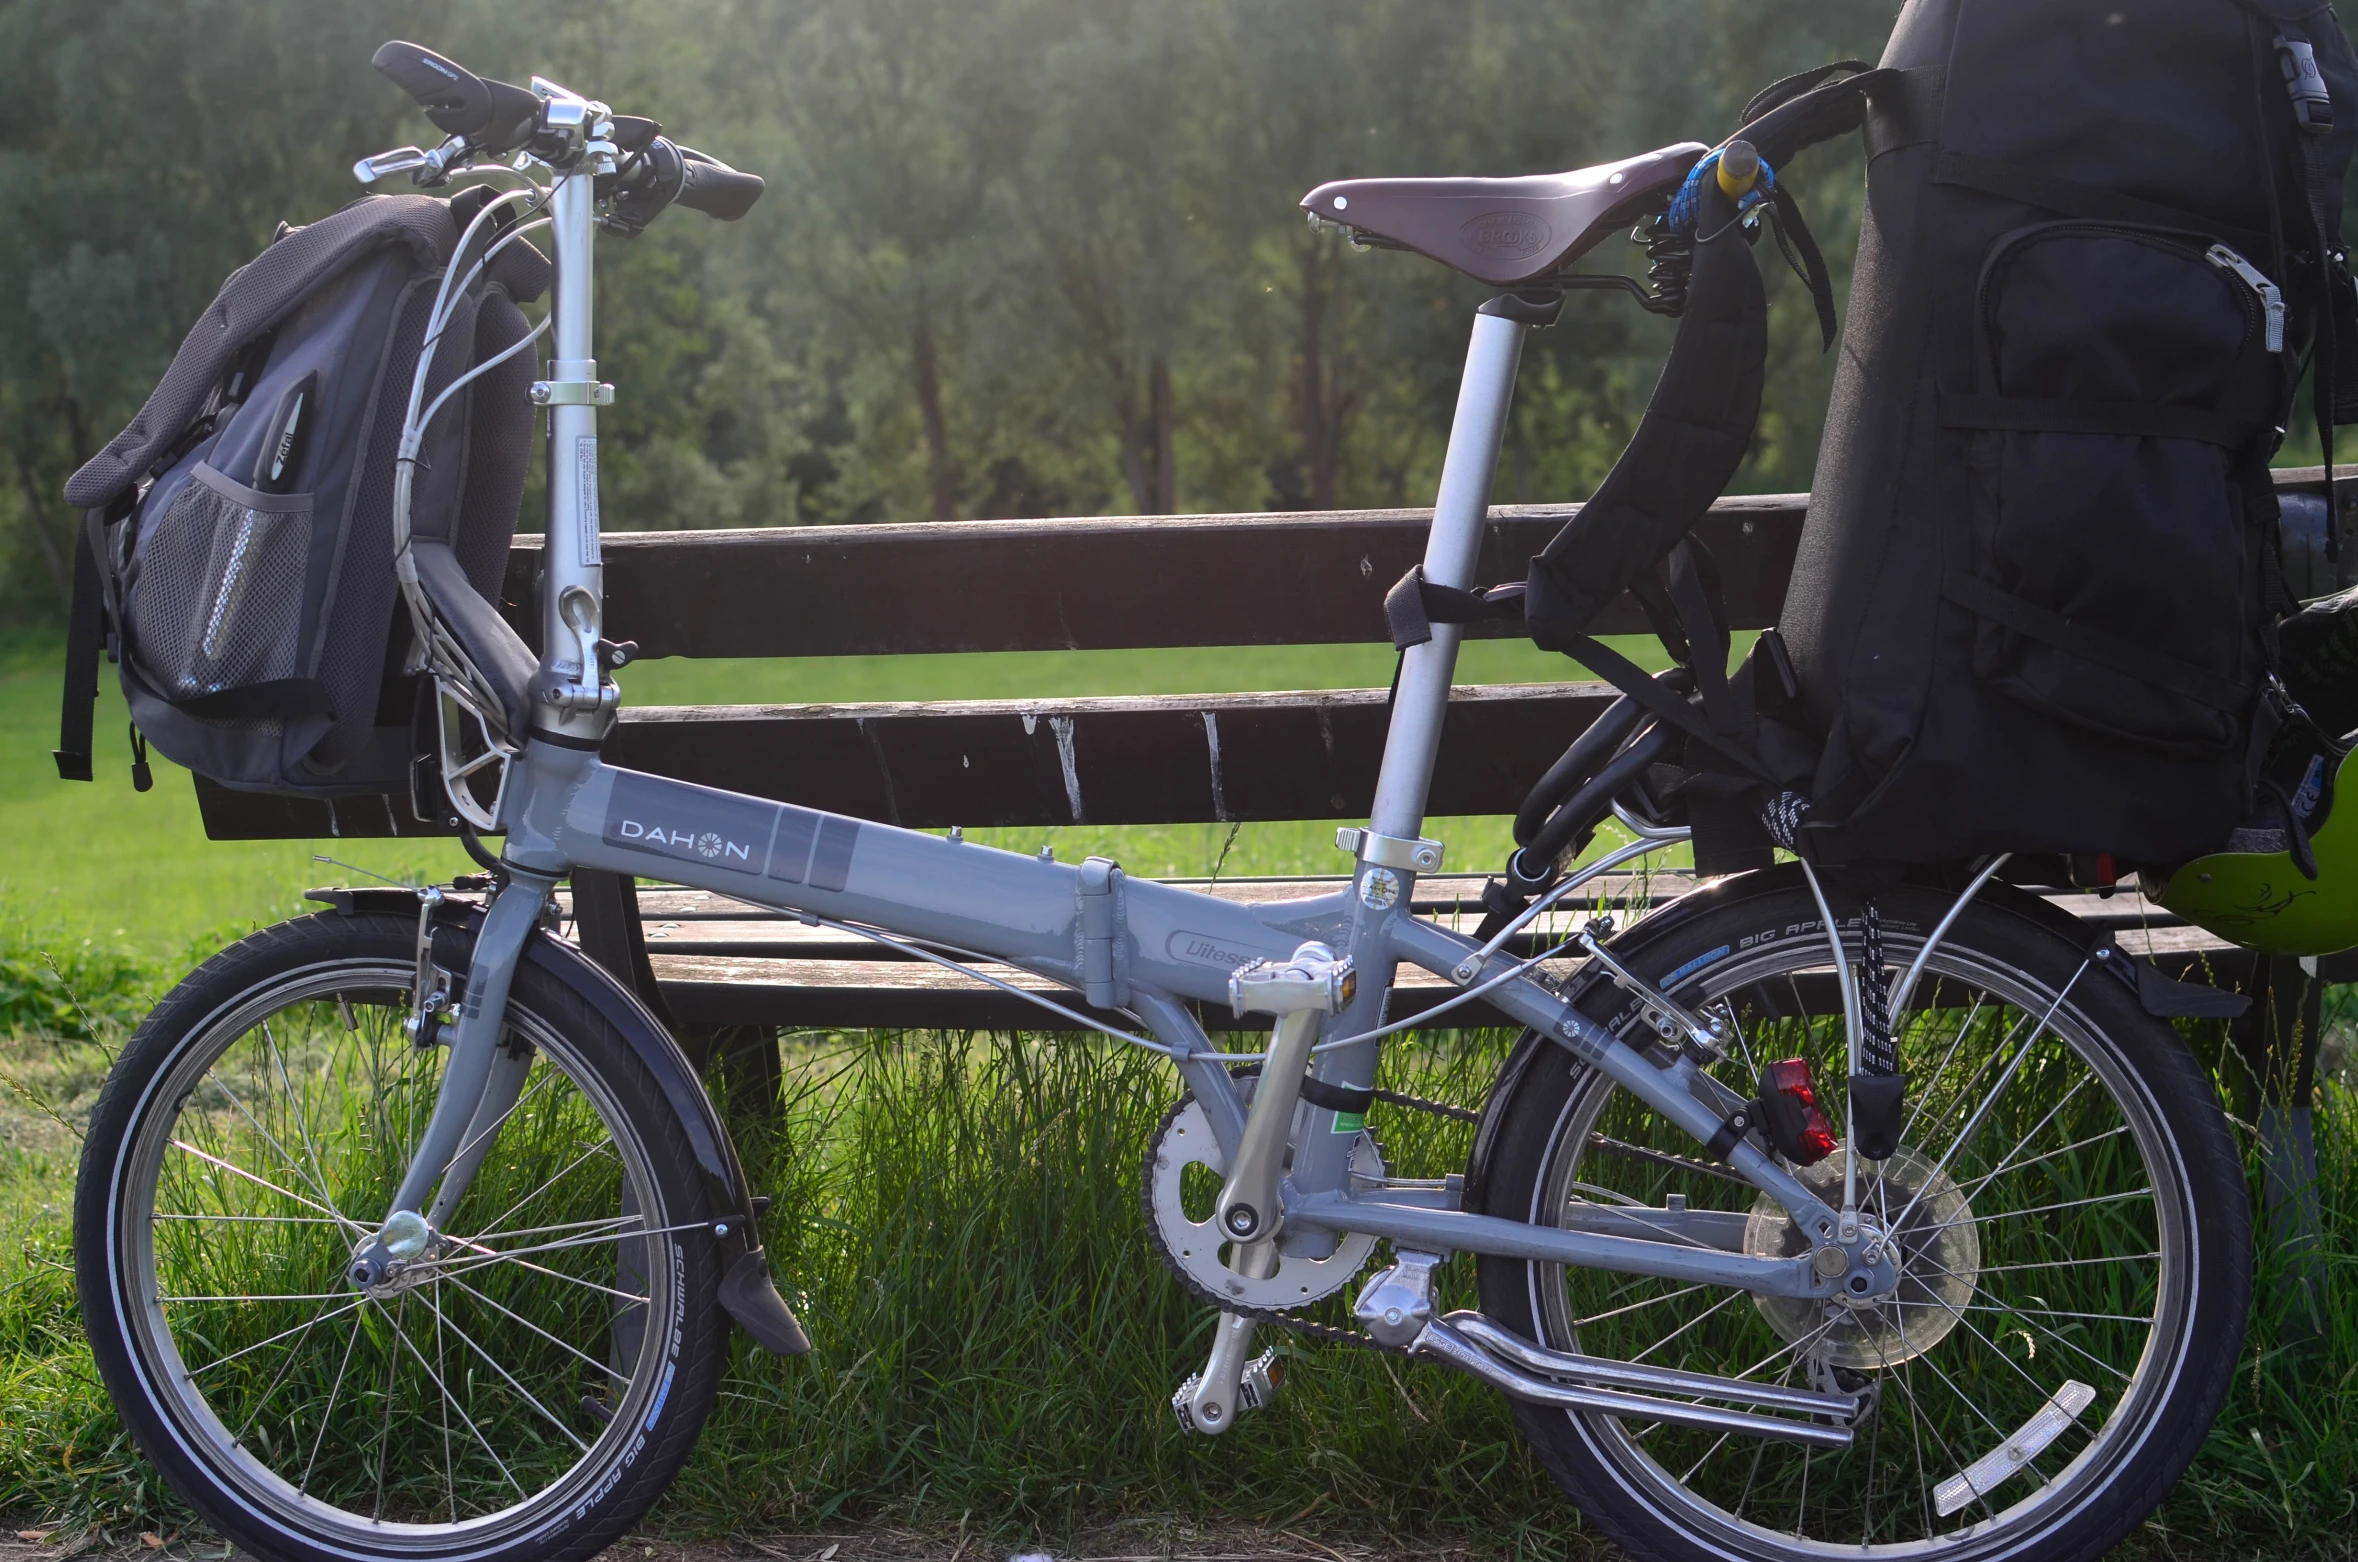 two bicycles are parked near a bench in the grass